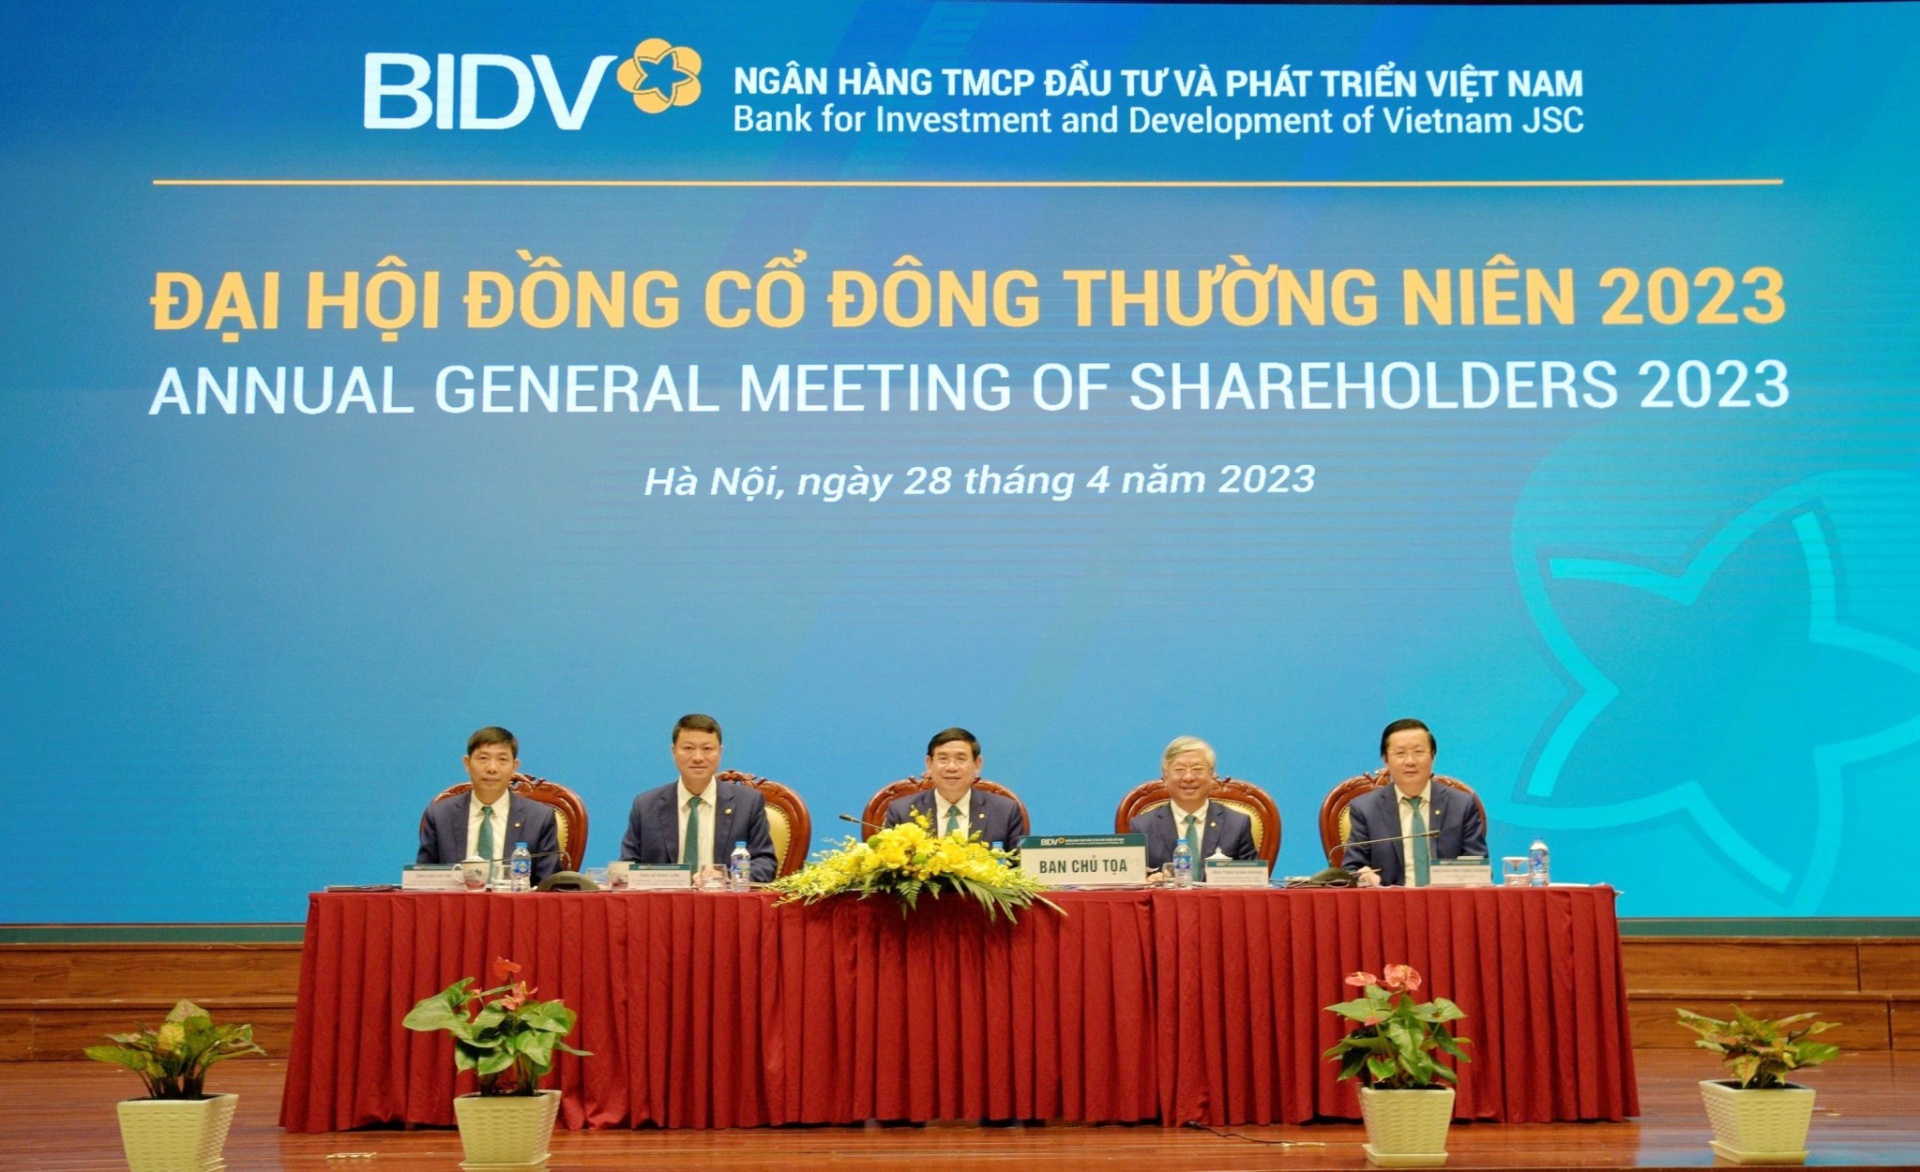 BIDV becomes largest bank in Vietnam by total assets